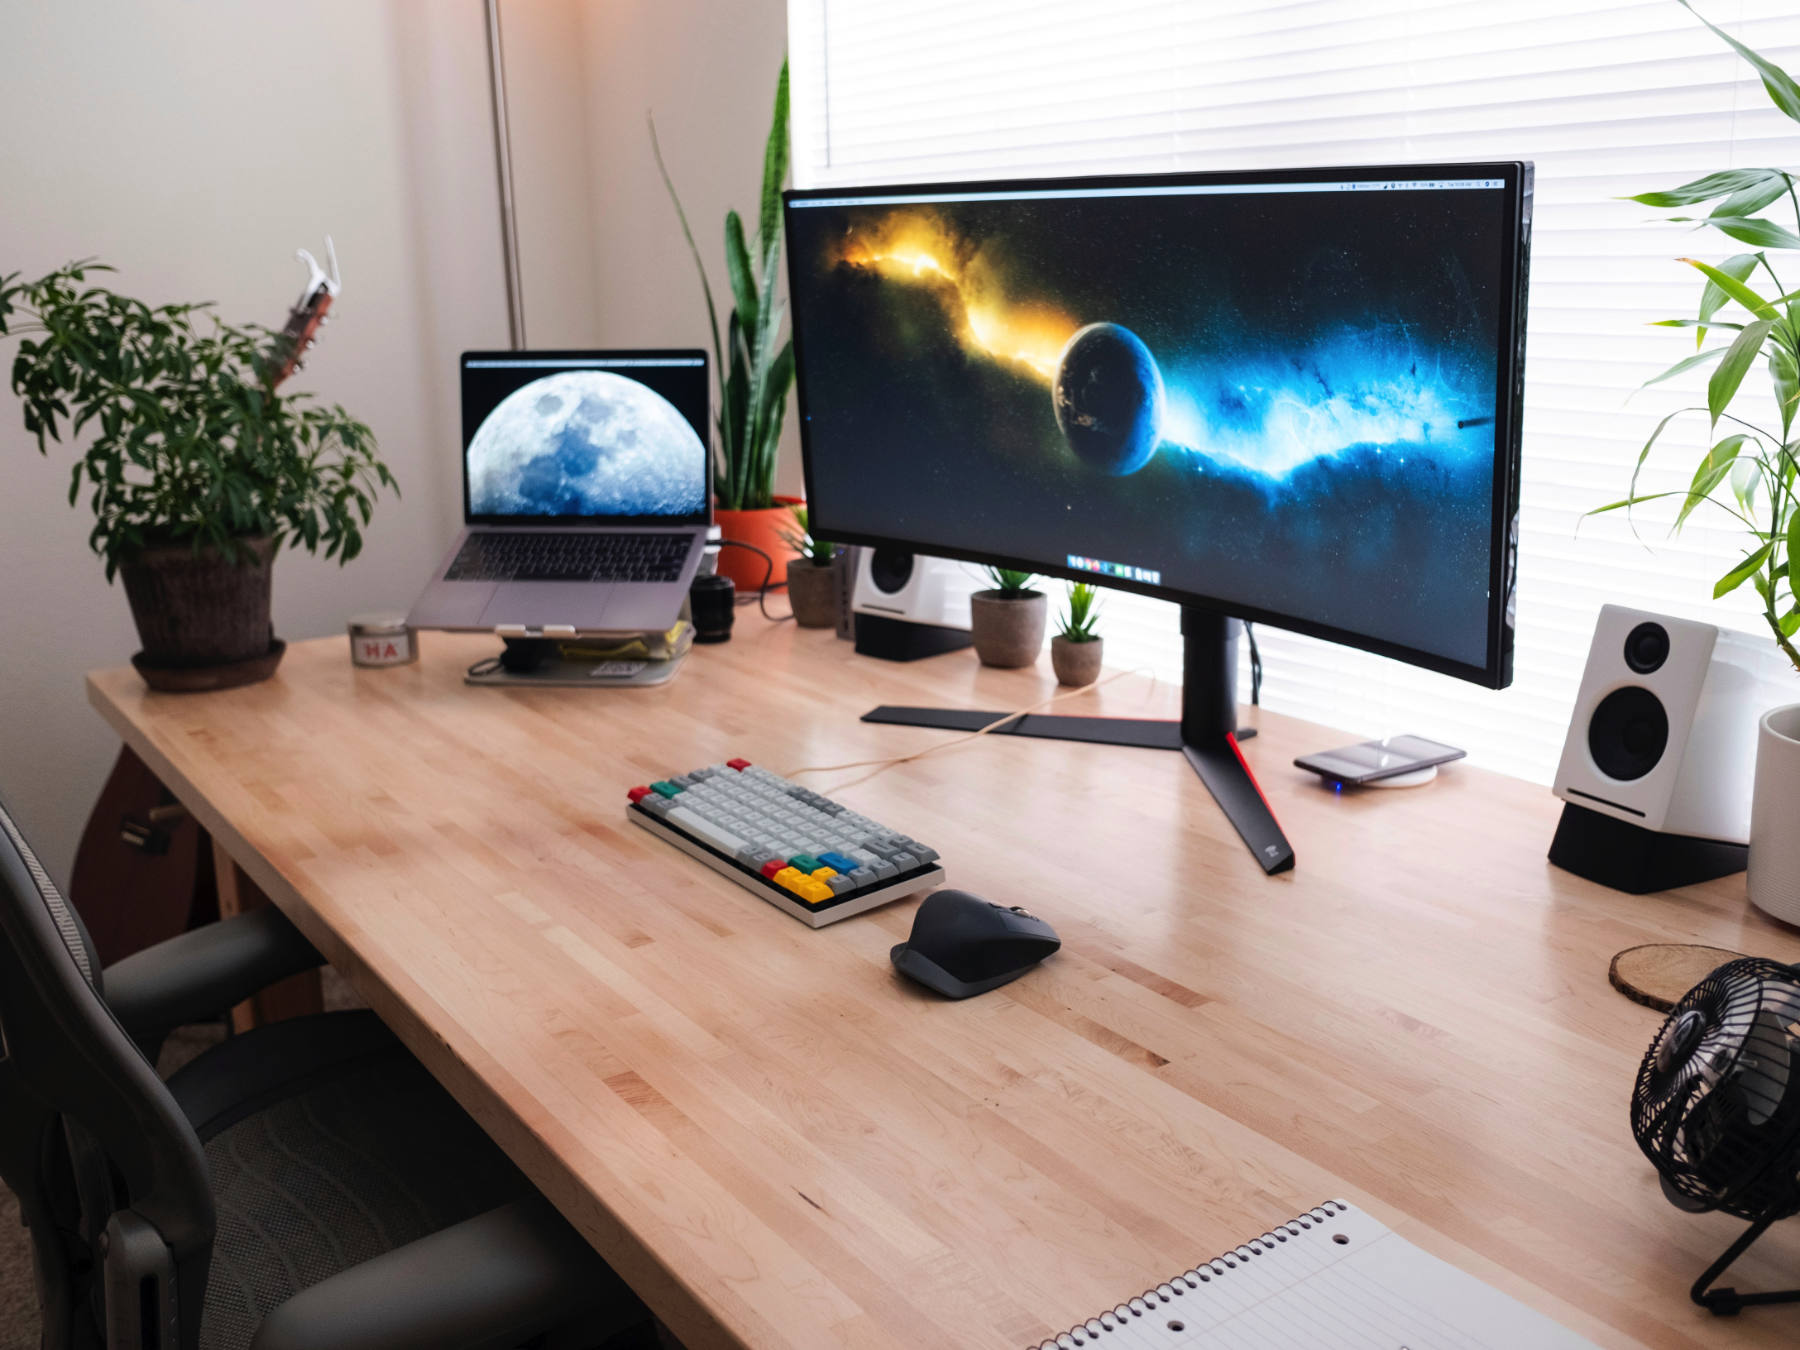 Our Top 5 Keyboards for Home Office Use